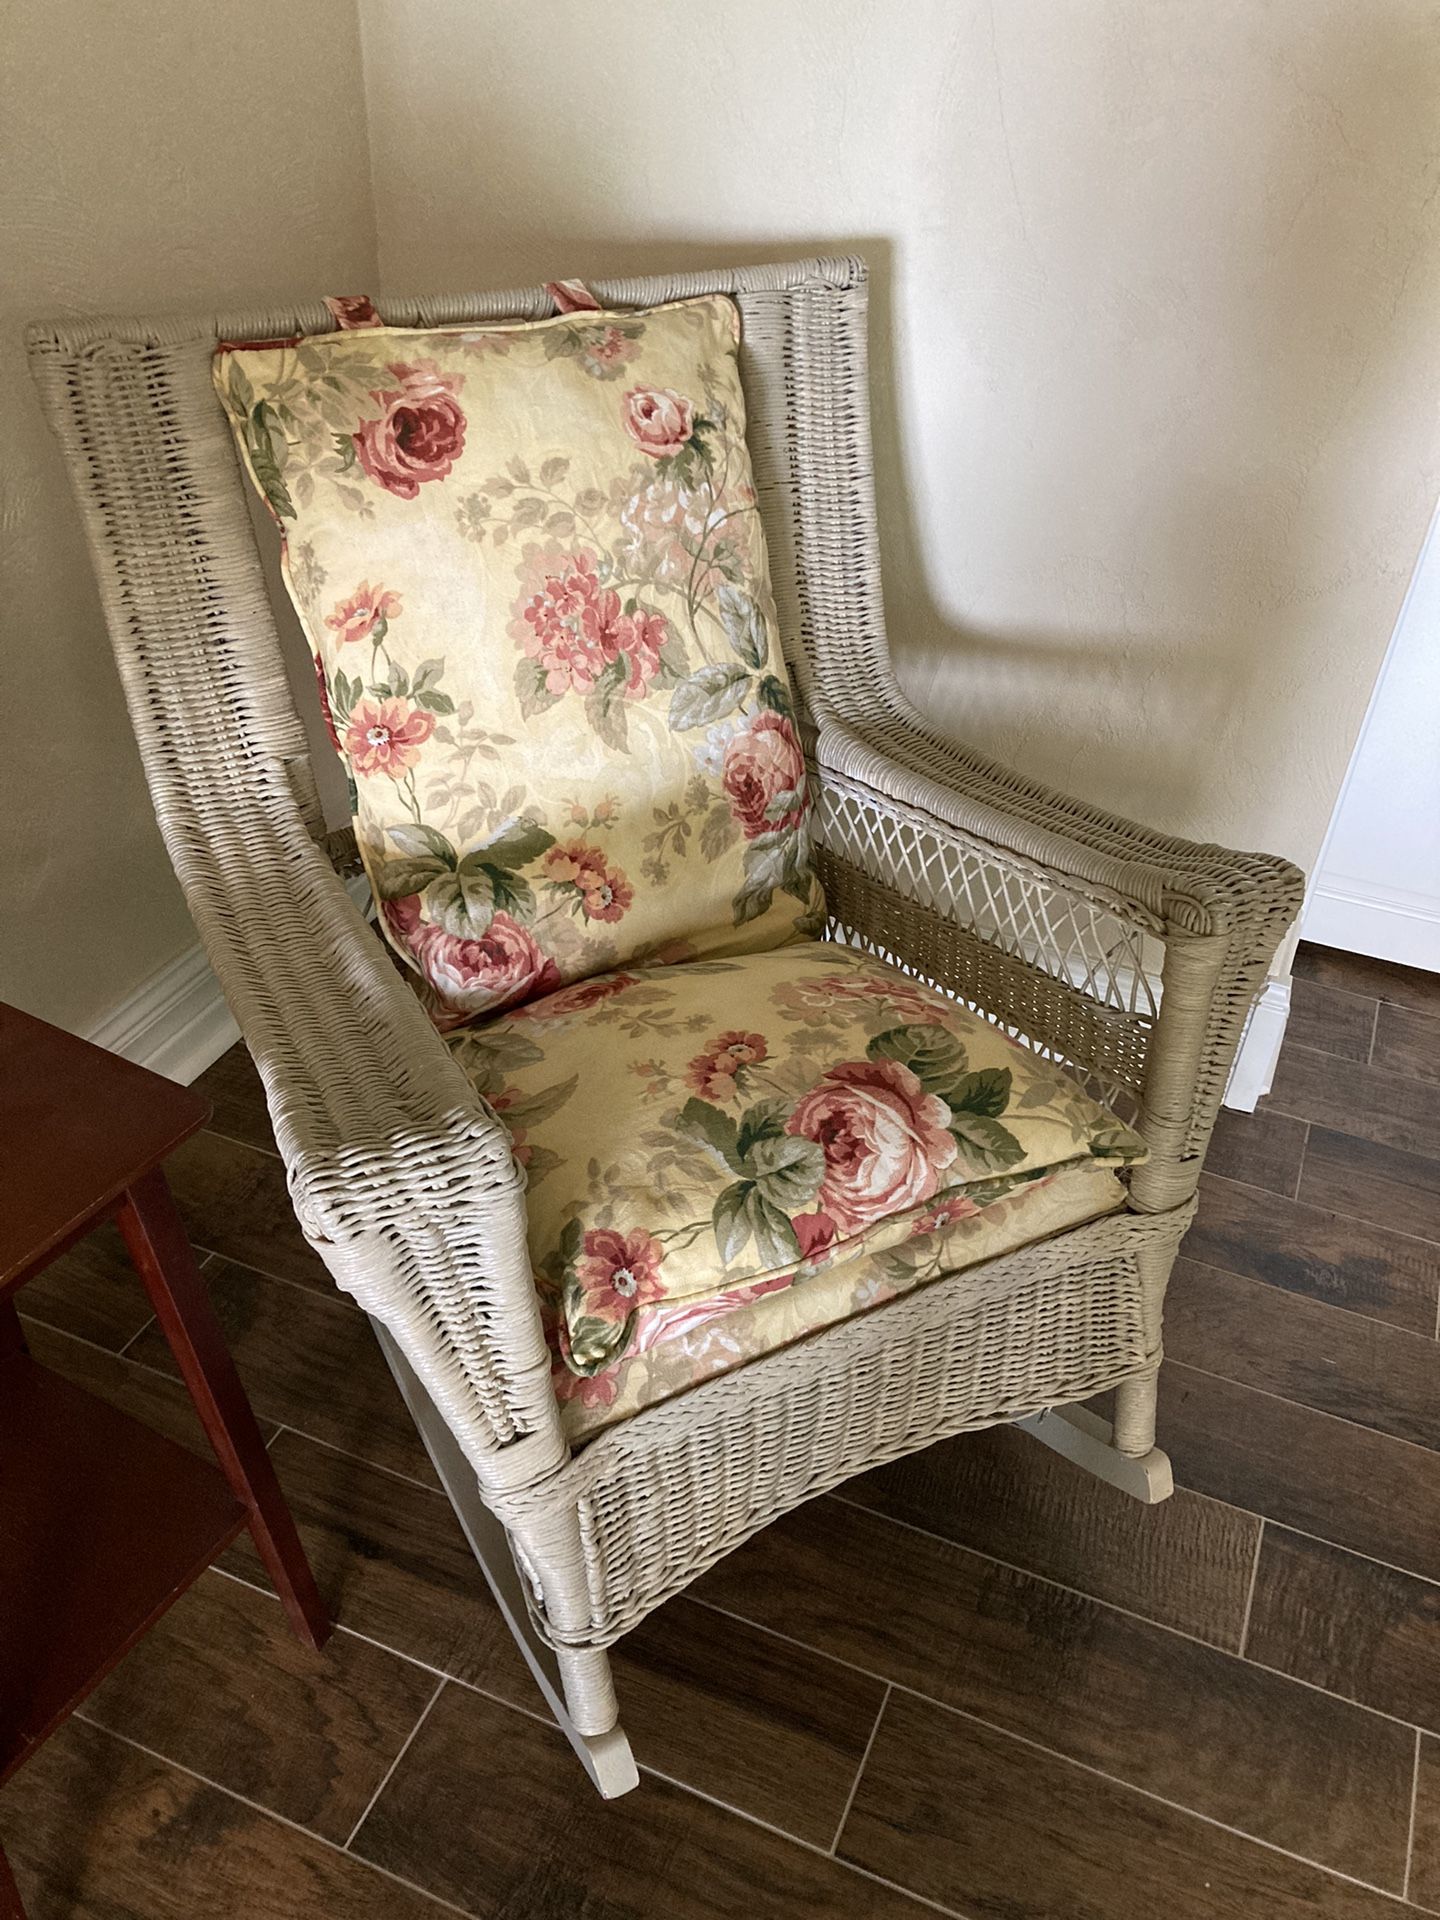 Antique Settee/Day Bed And  Rocker